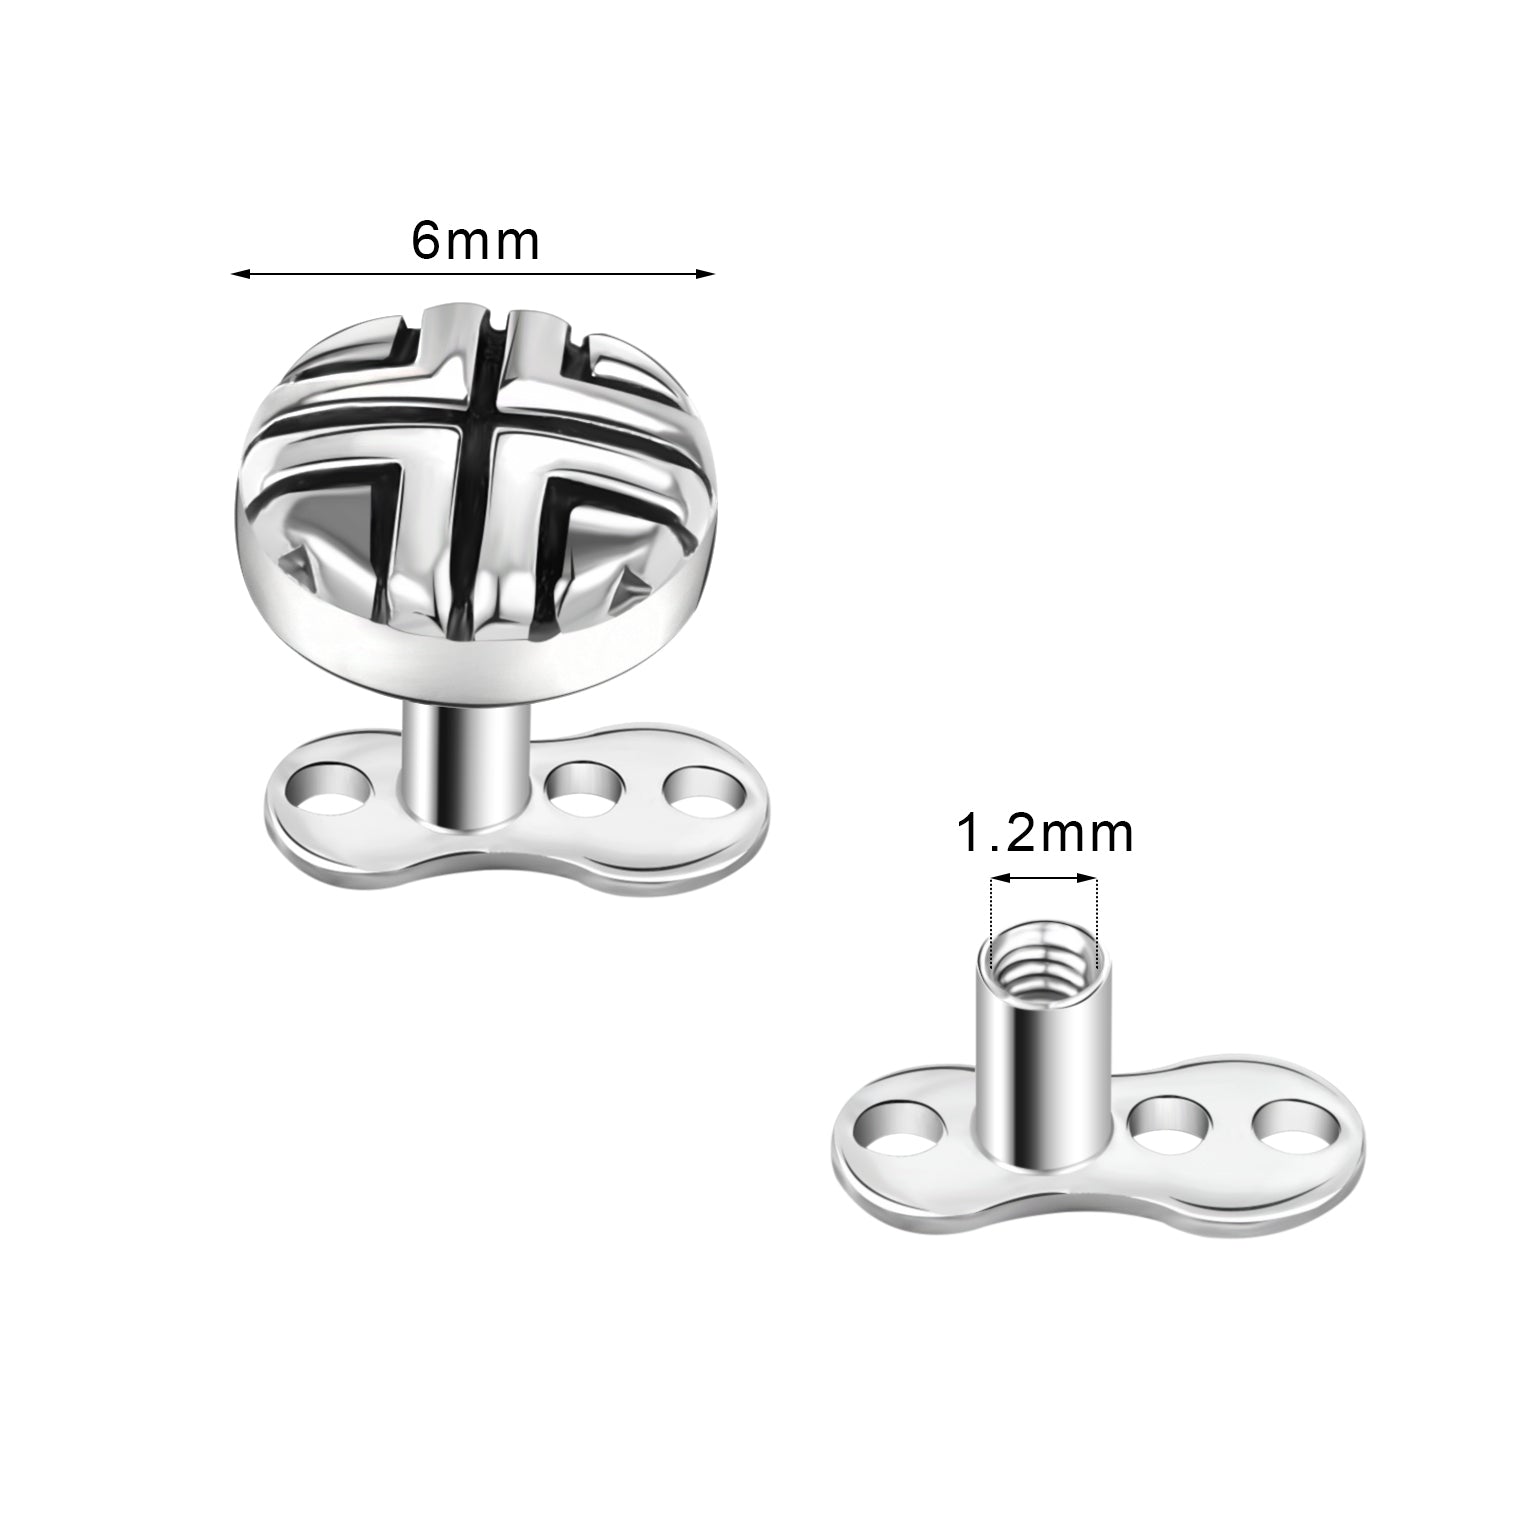 16g-geometry-dermal-anchor-tops-and-surgical-steel-base-microdermis